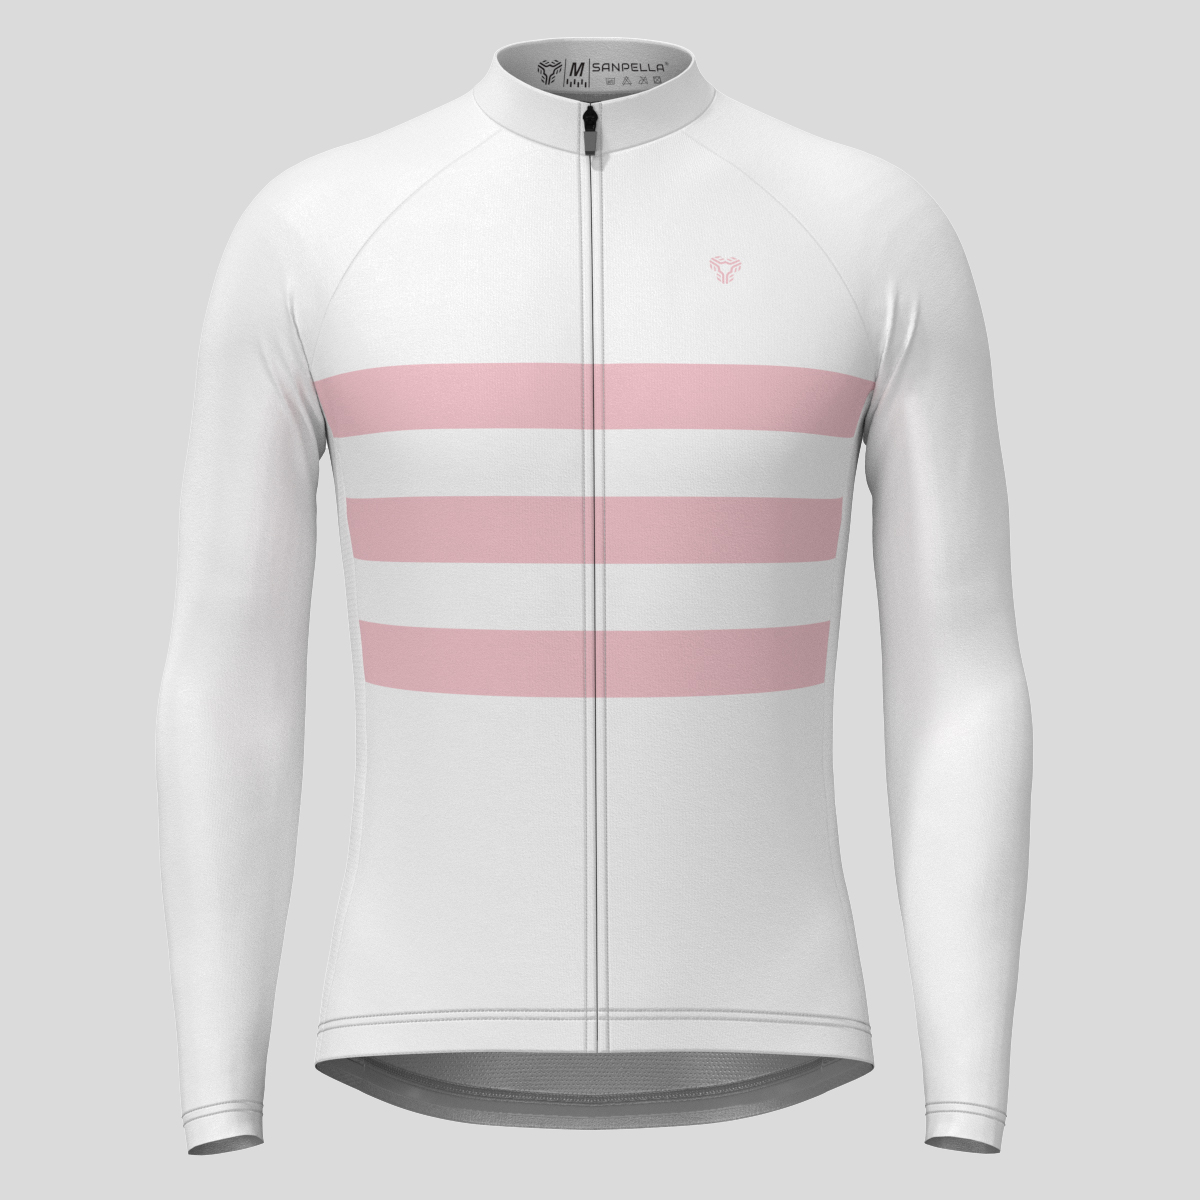 Men's Classic Stripes LS Cycling Jersey - White/Pink 